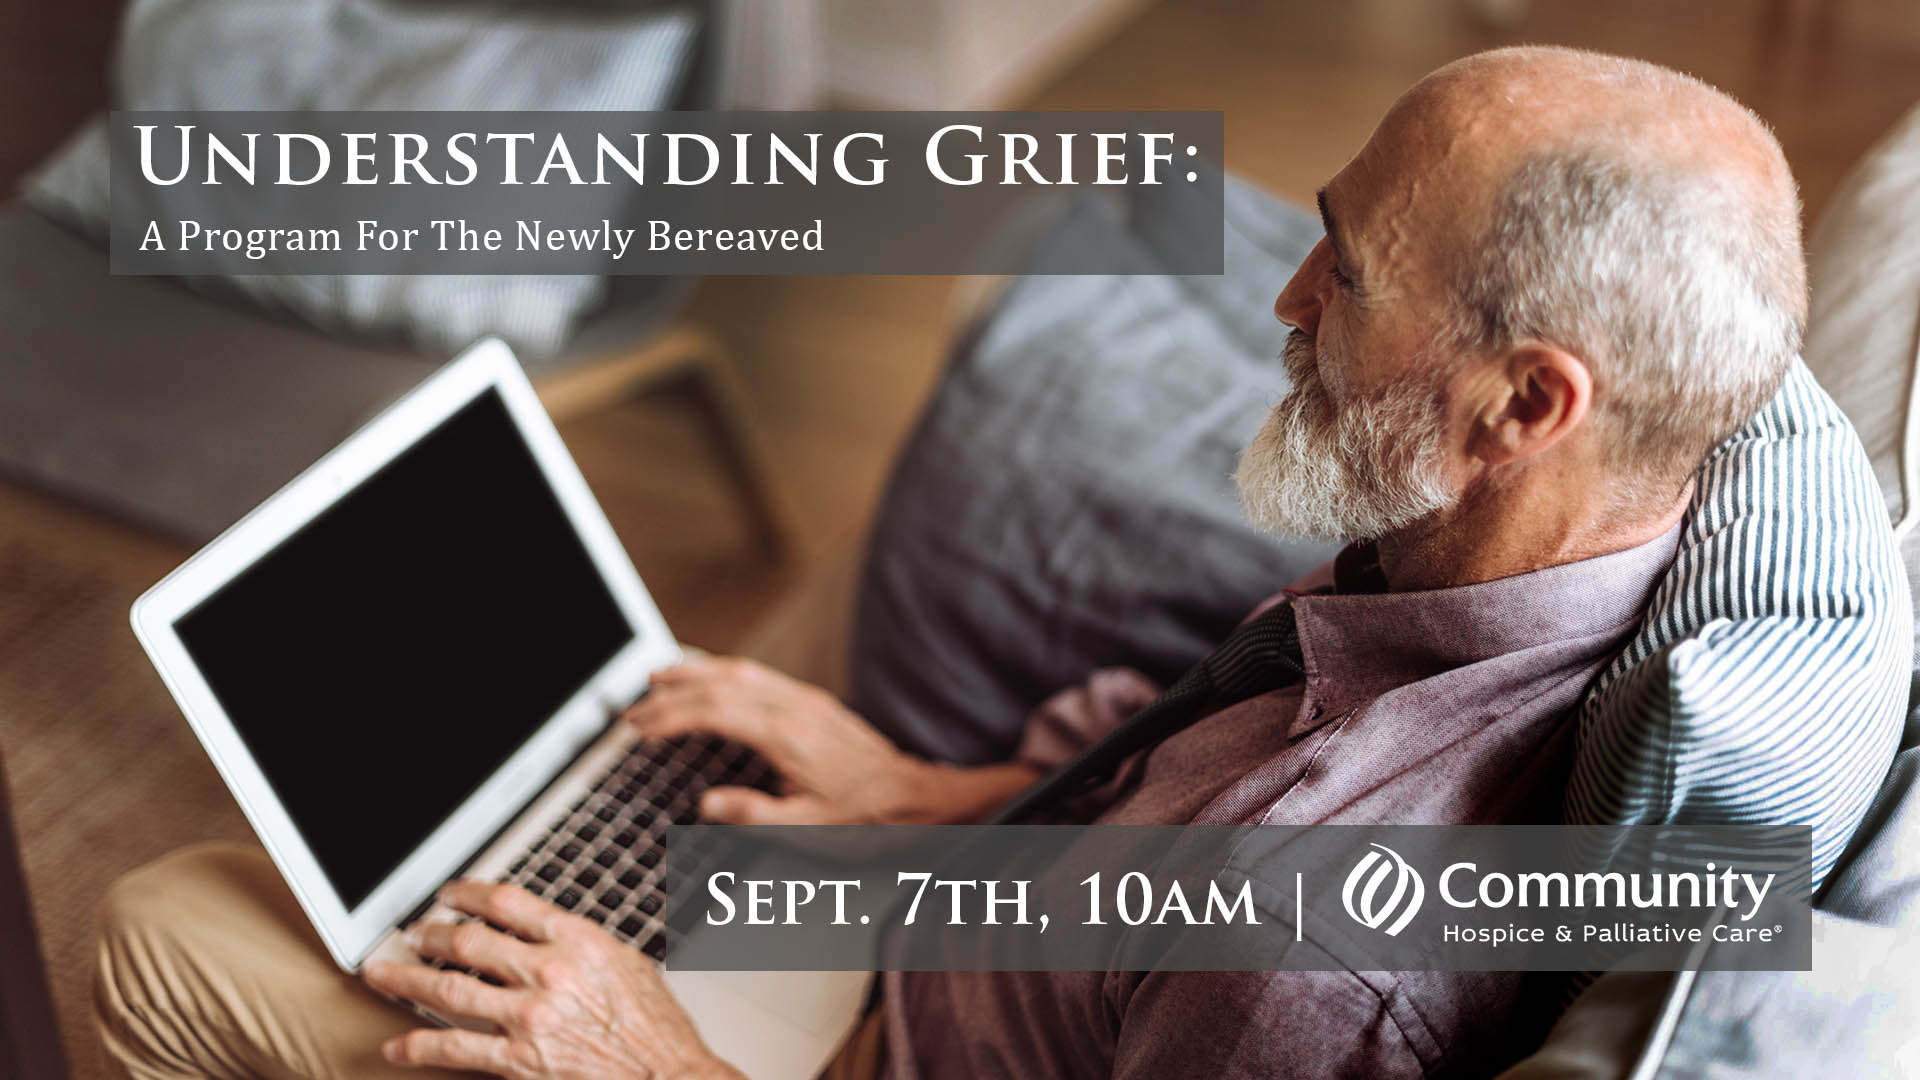 Understanding Grief - A Program For The Newly Bereaved